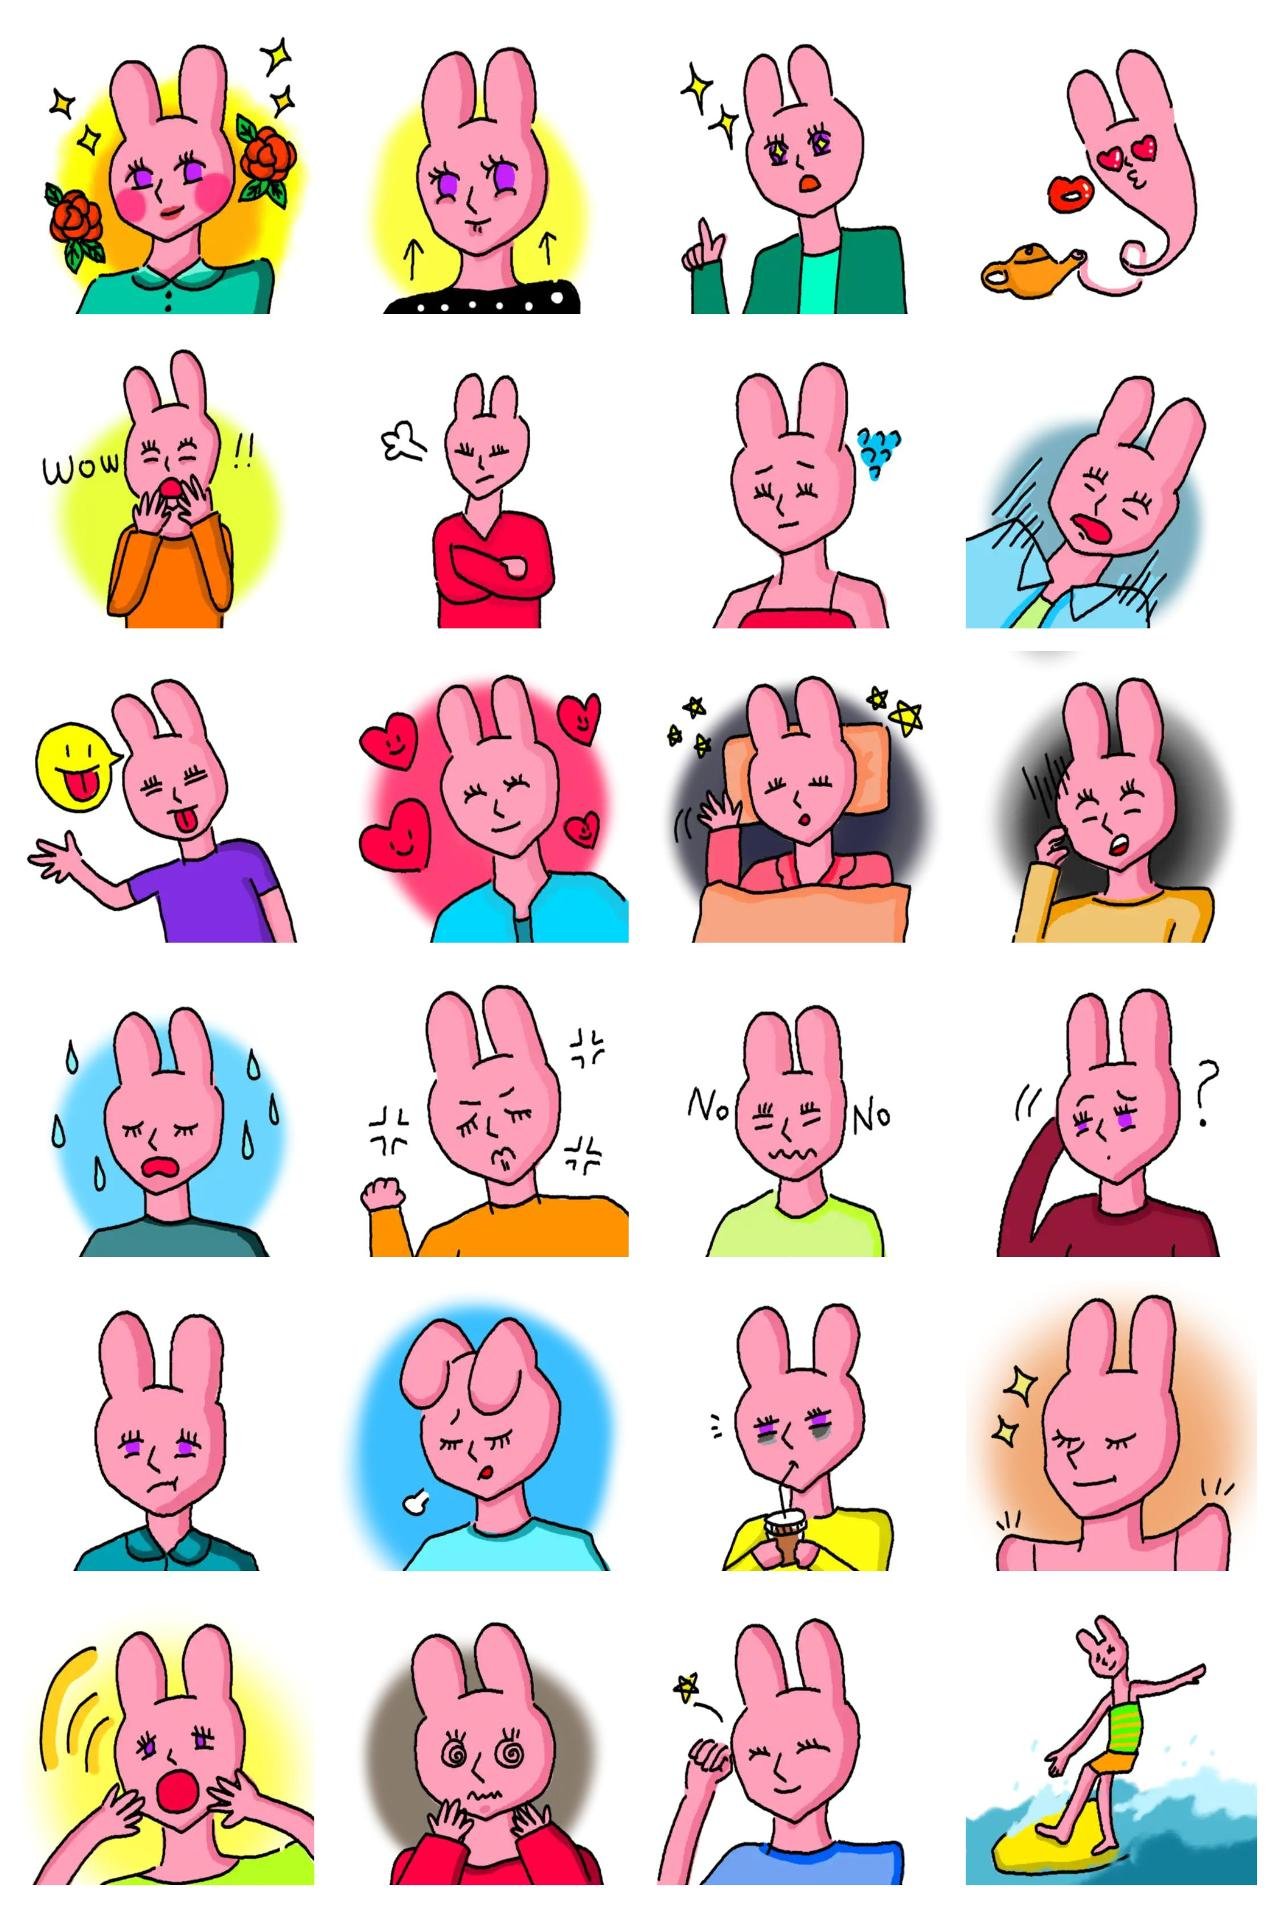 Human rabbit Animals sticker pack for Whatsapp, Telegram, Signal, and others chatting and message apps